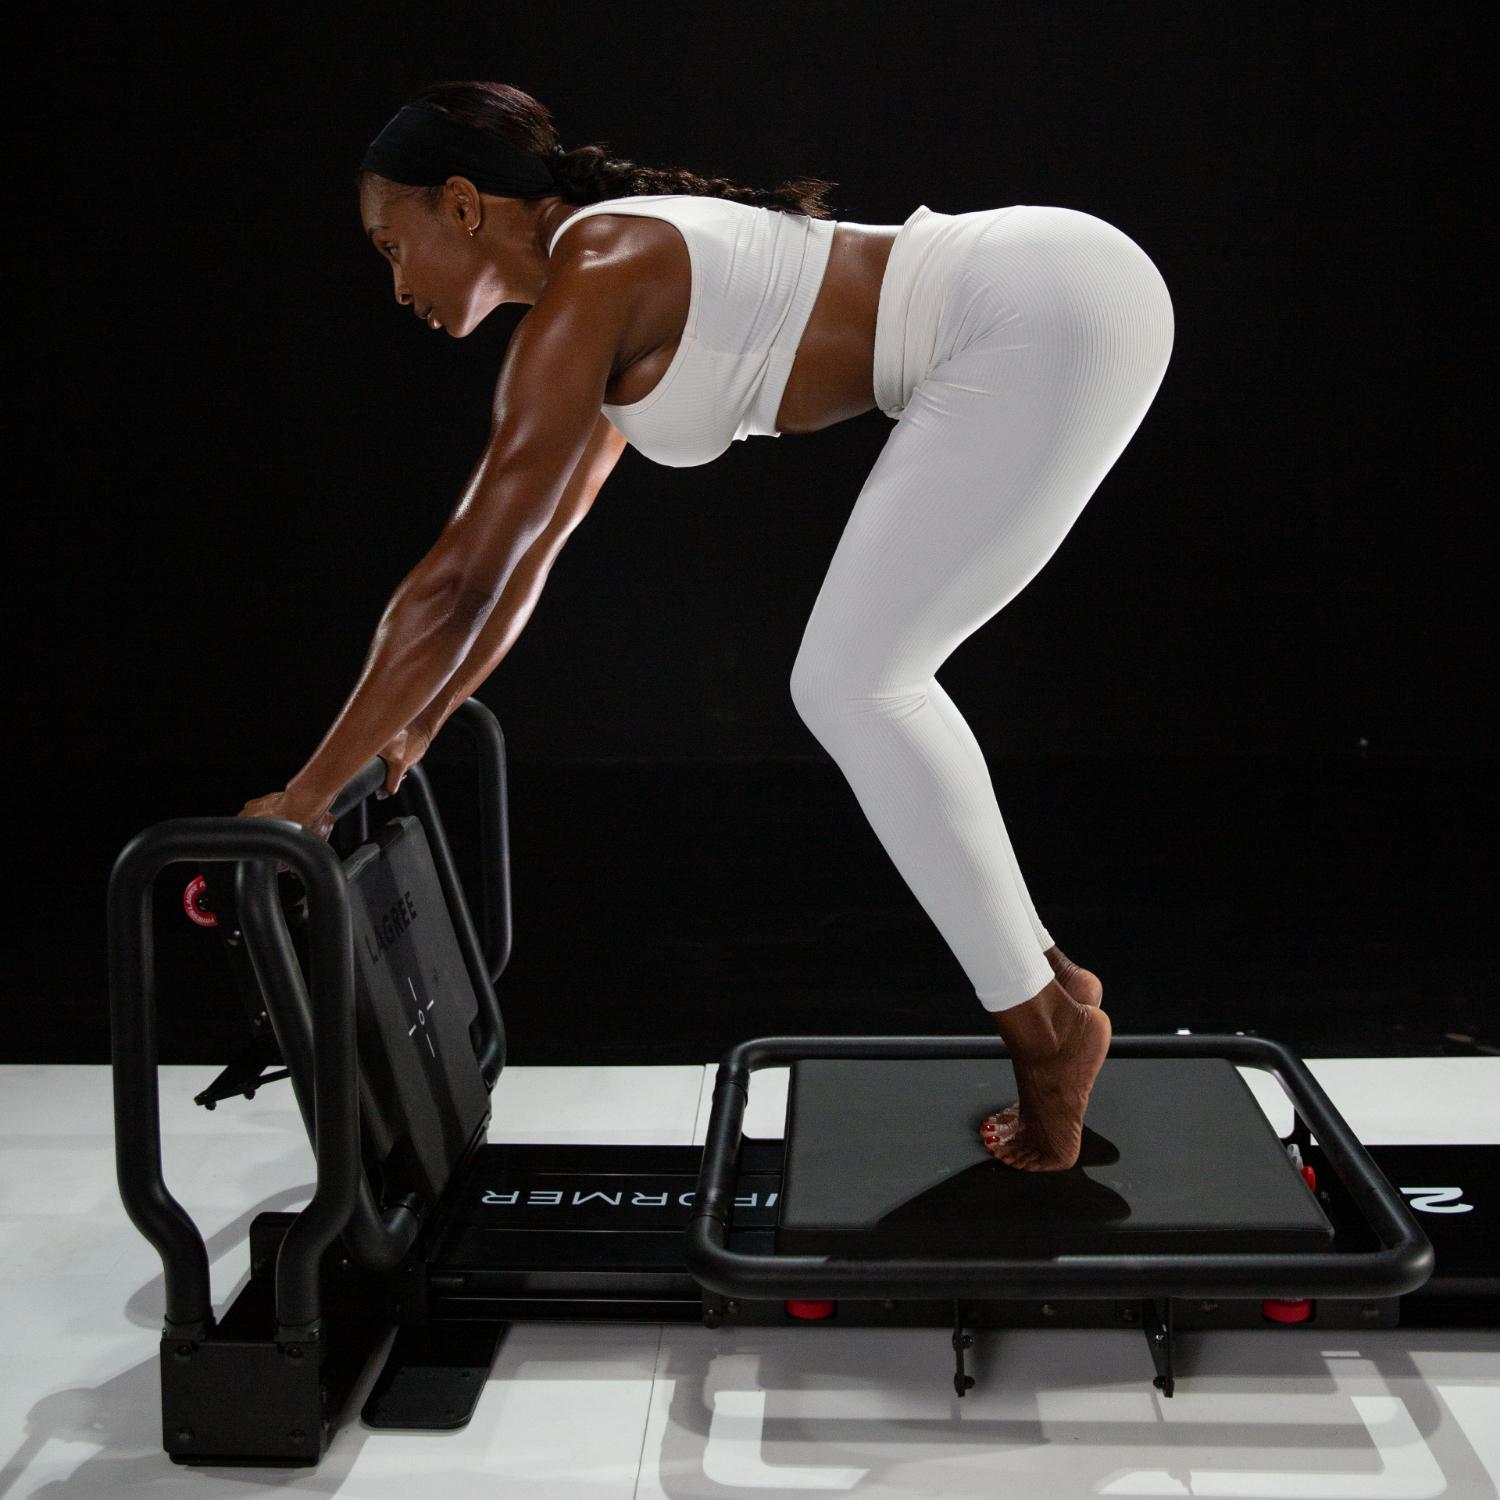 Lagree Fitness Miniformer workout machine goes from 0º to 90º with new  angling tech » Gadget Flow